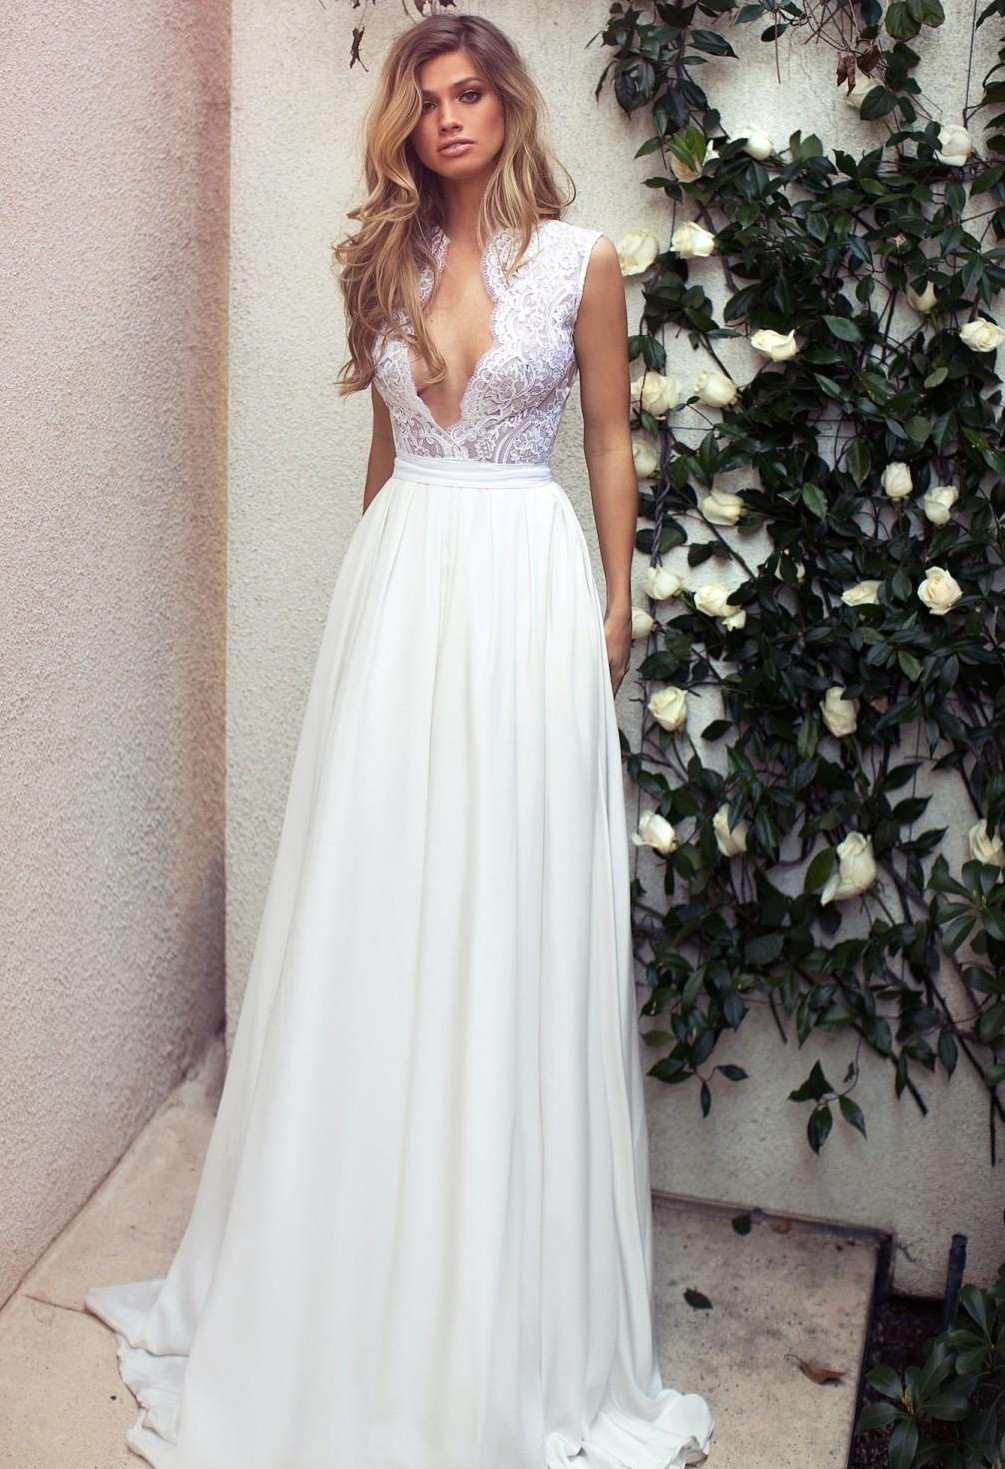 Sexy Dresses To Wear To A Wedding
 15 Incredible Ideas of y Wedding Dresses